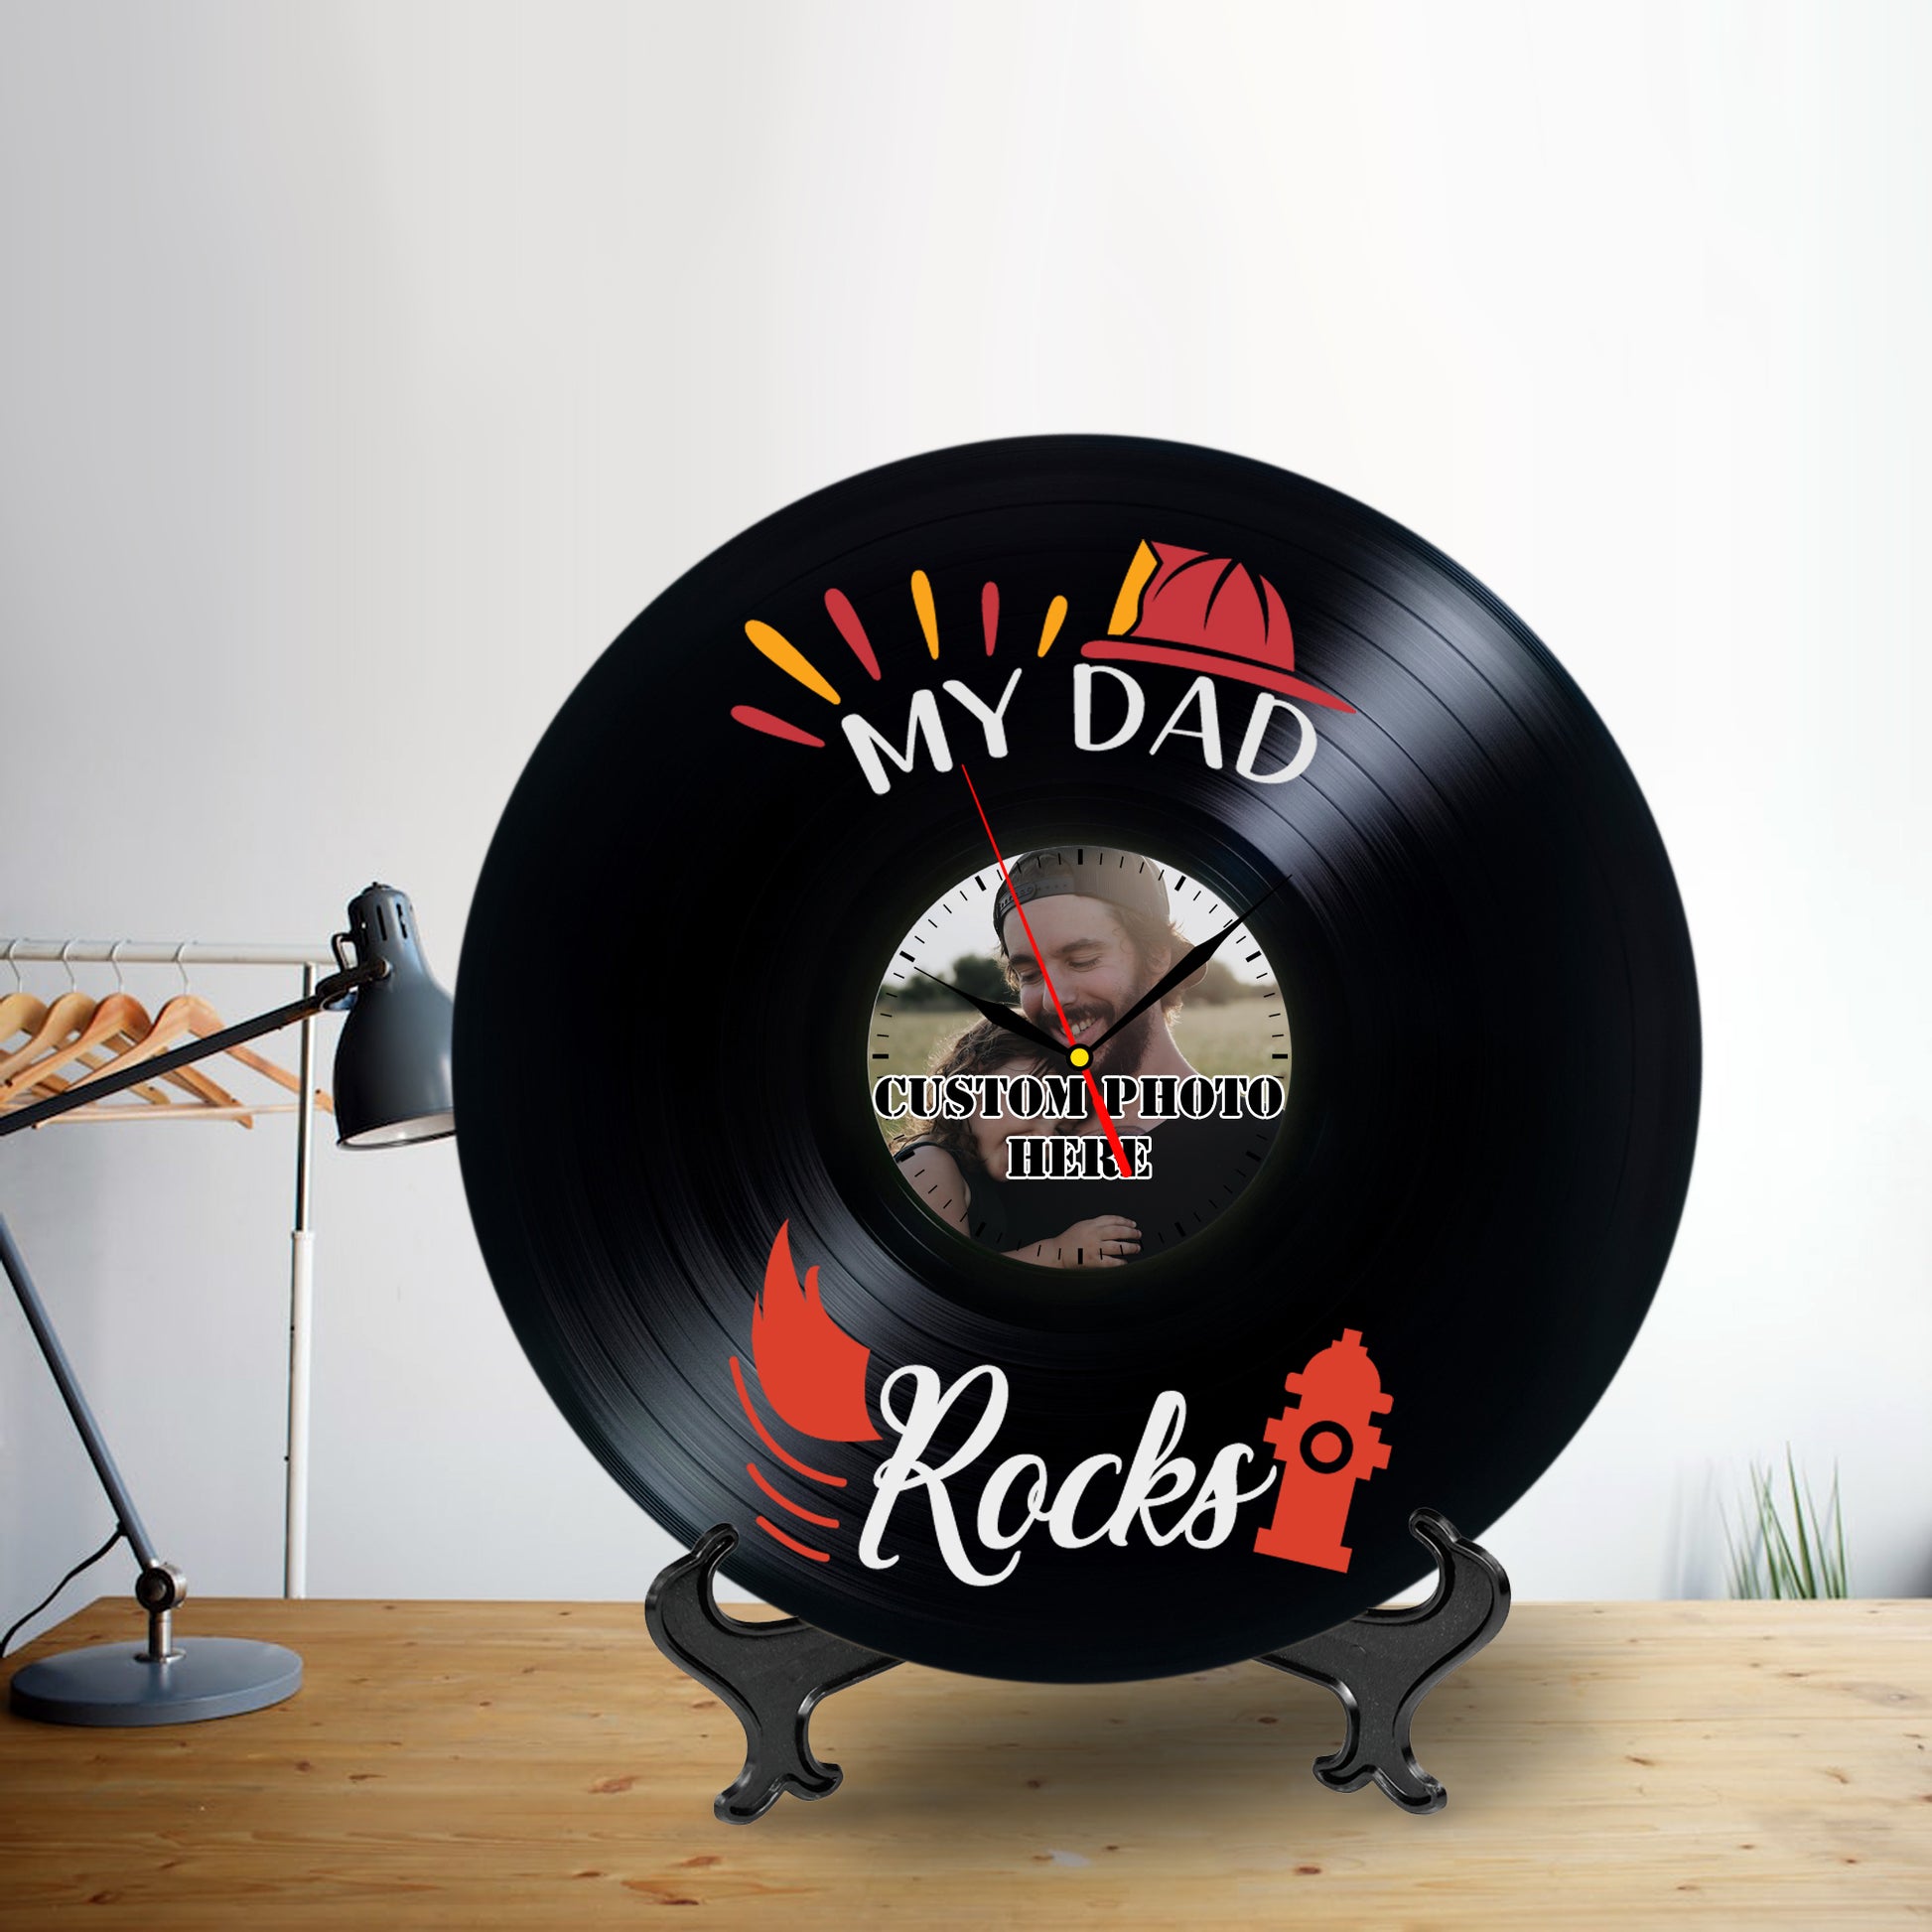 Custom Photo Lp Record Clock Gift for Firefighter Dad